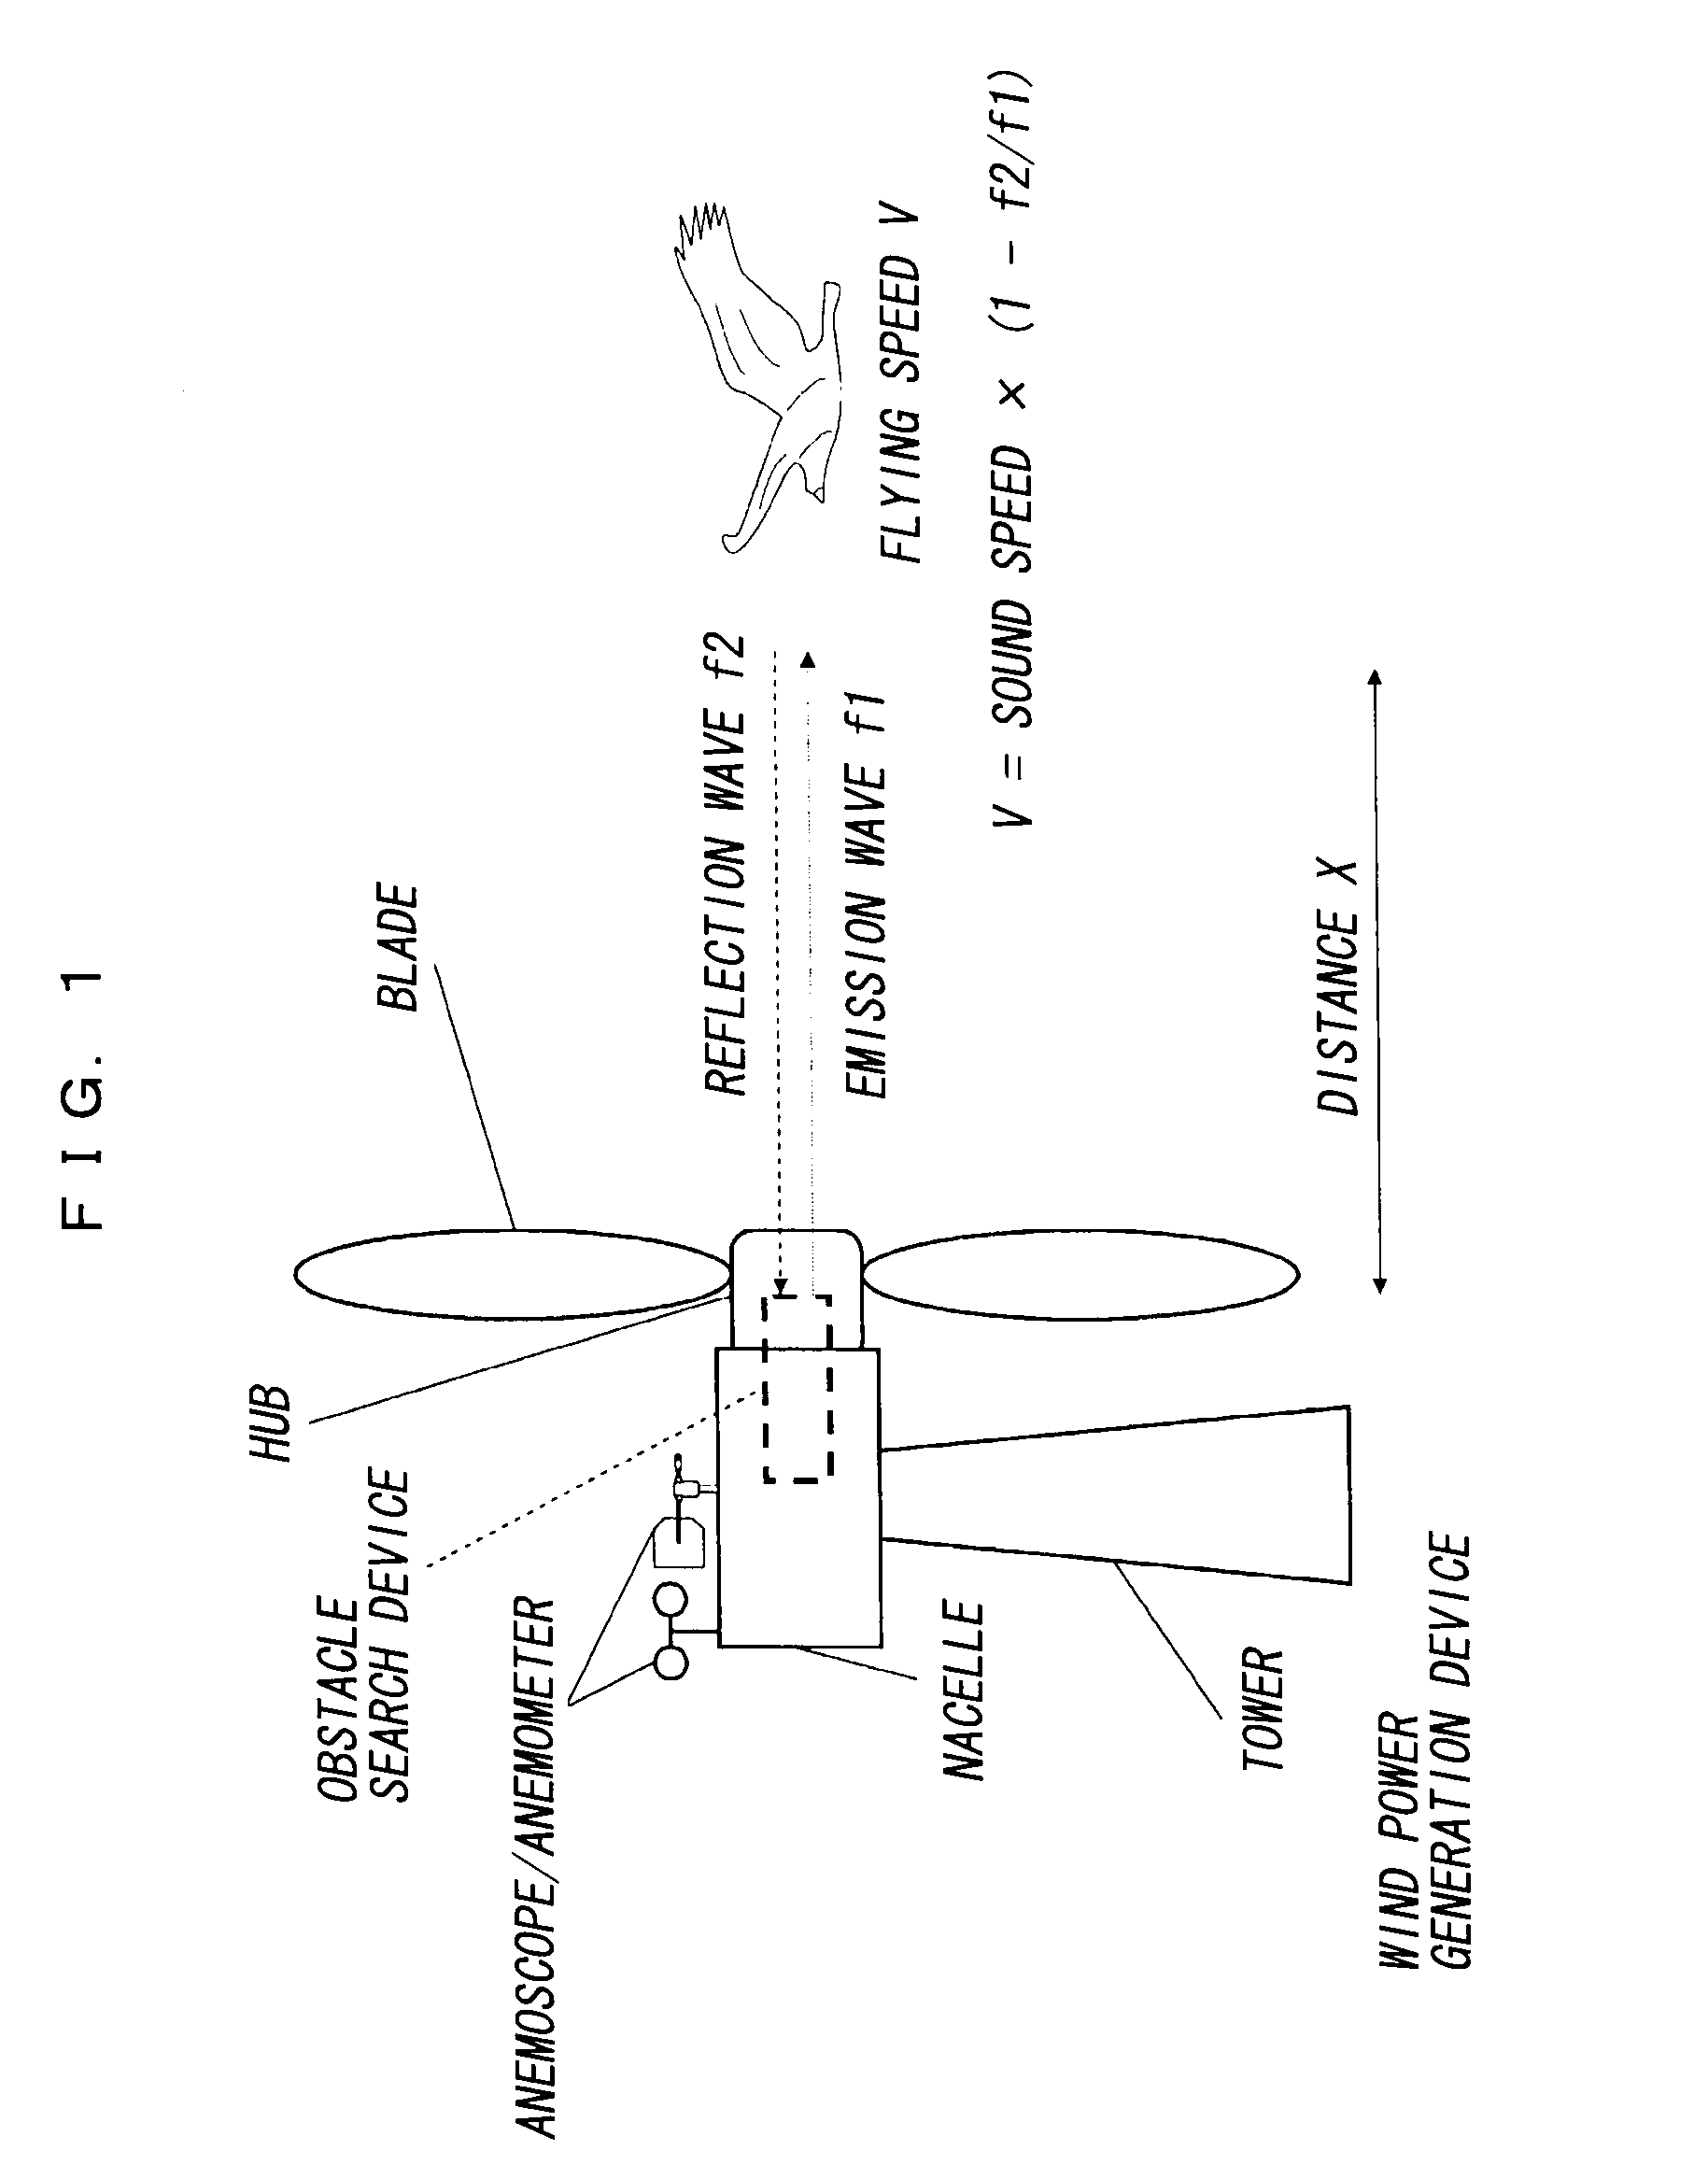 Wind-driven electricity generation device, method of controlling wind-driven electricity generation device, and computer program